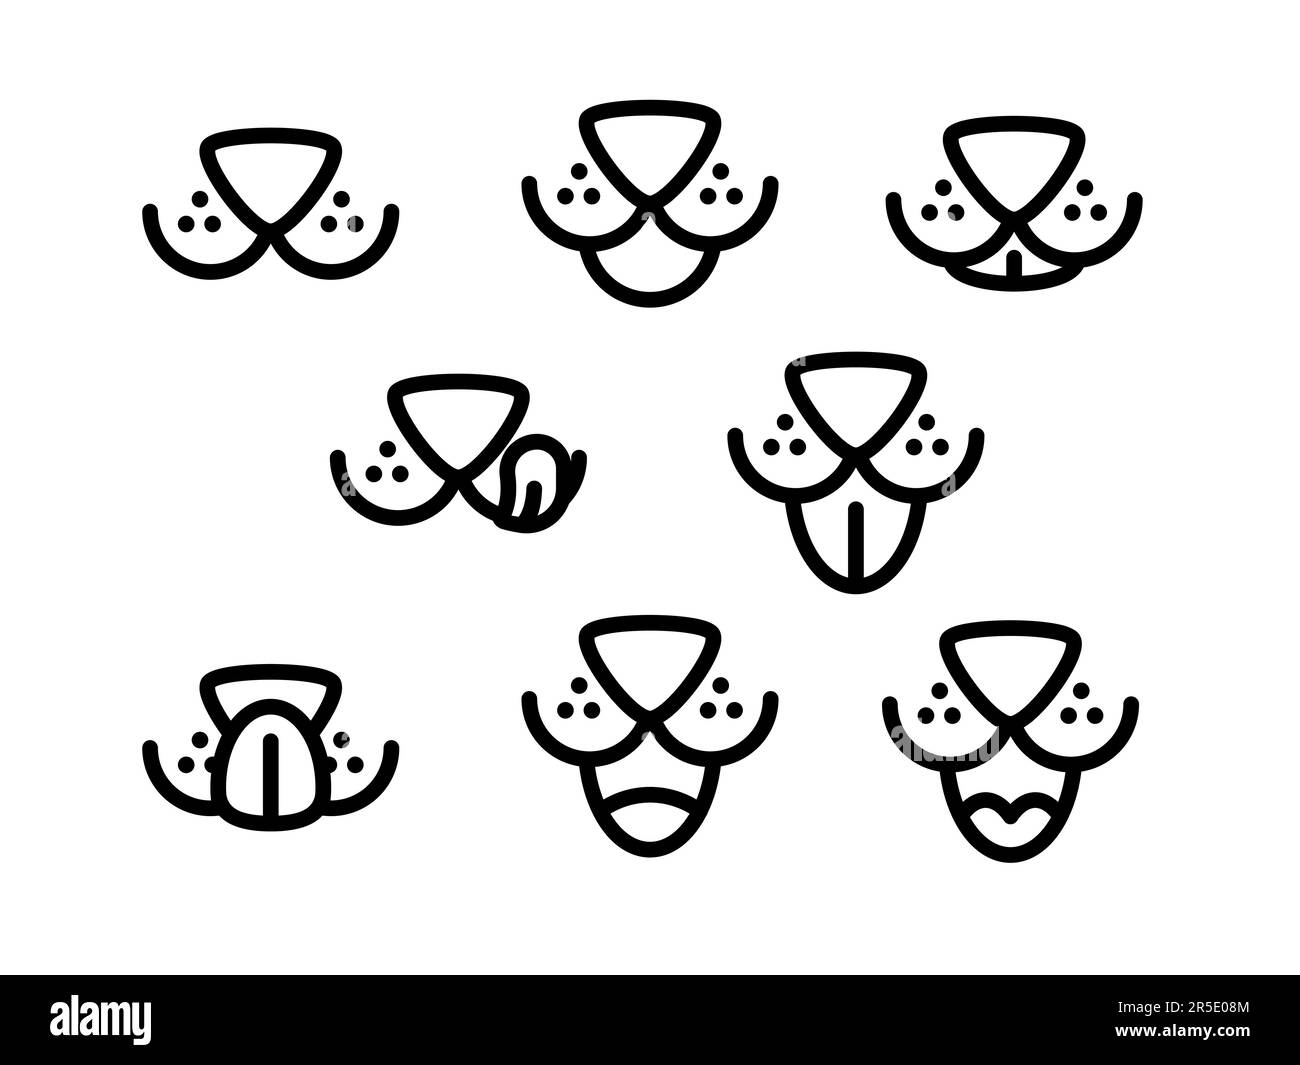 dog mouth expression funny animal doggy emotion face collection animation Stock Vector